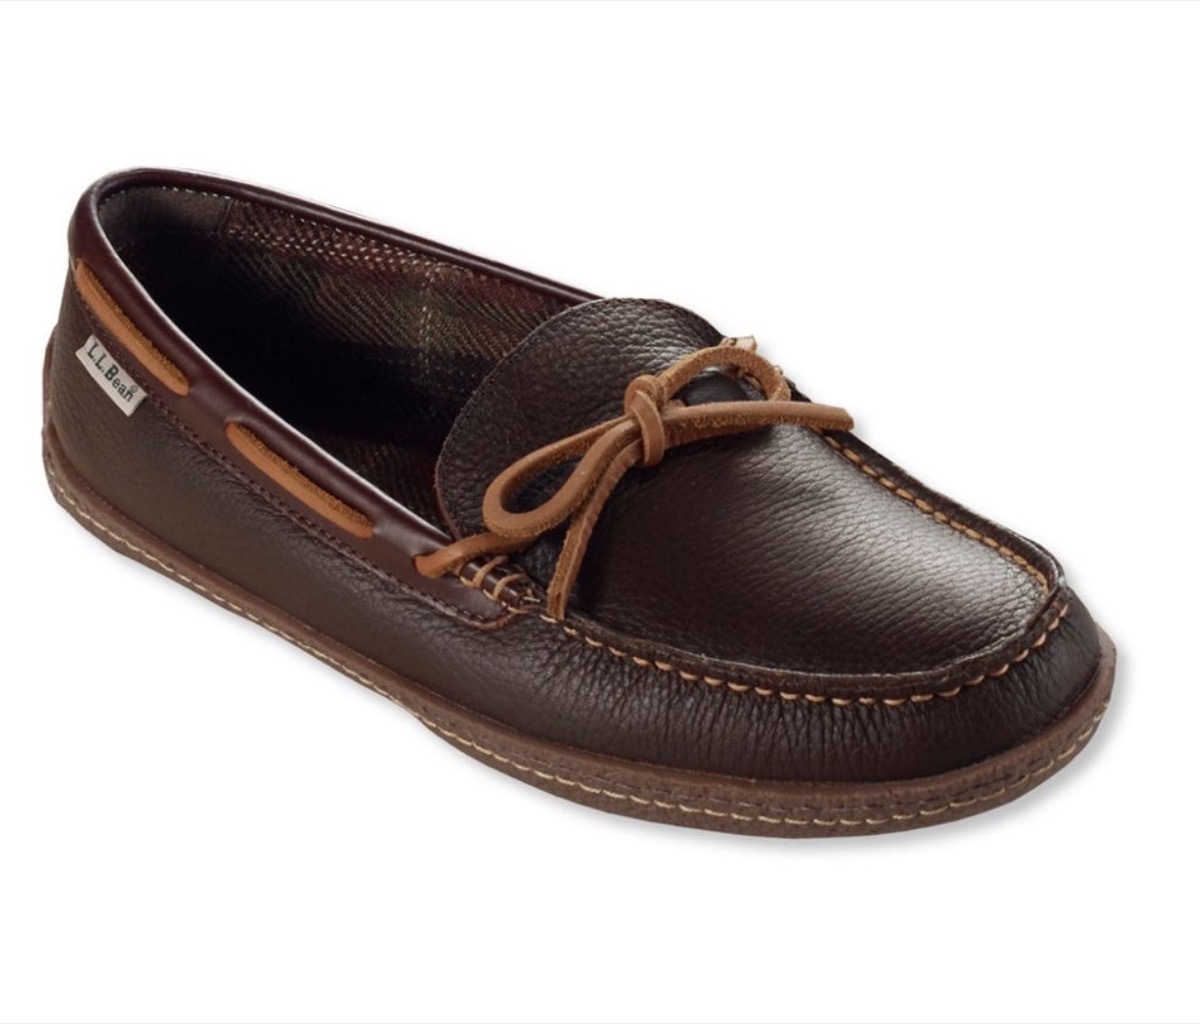 brown leather slippers with light brown topstitching